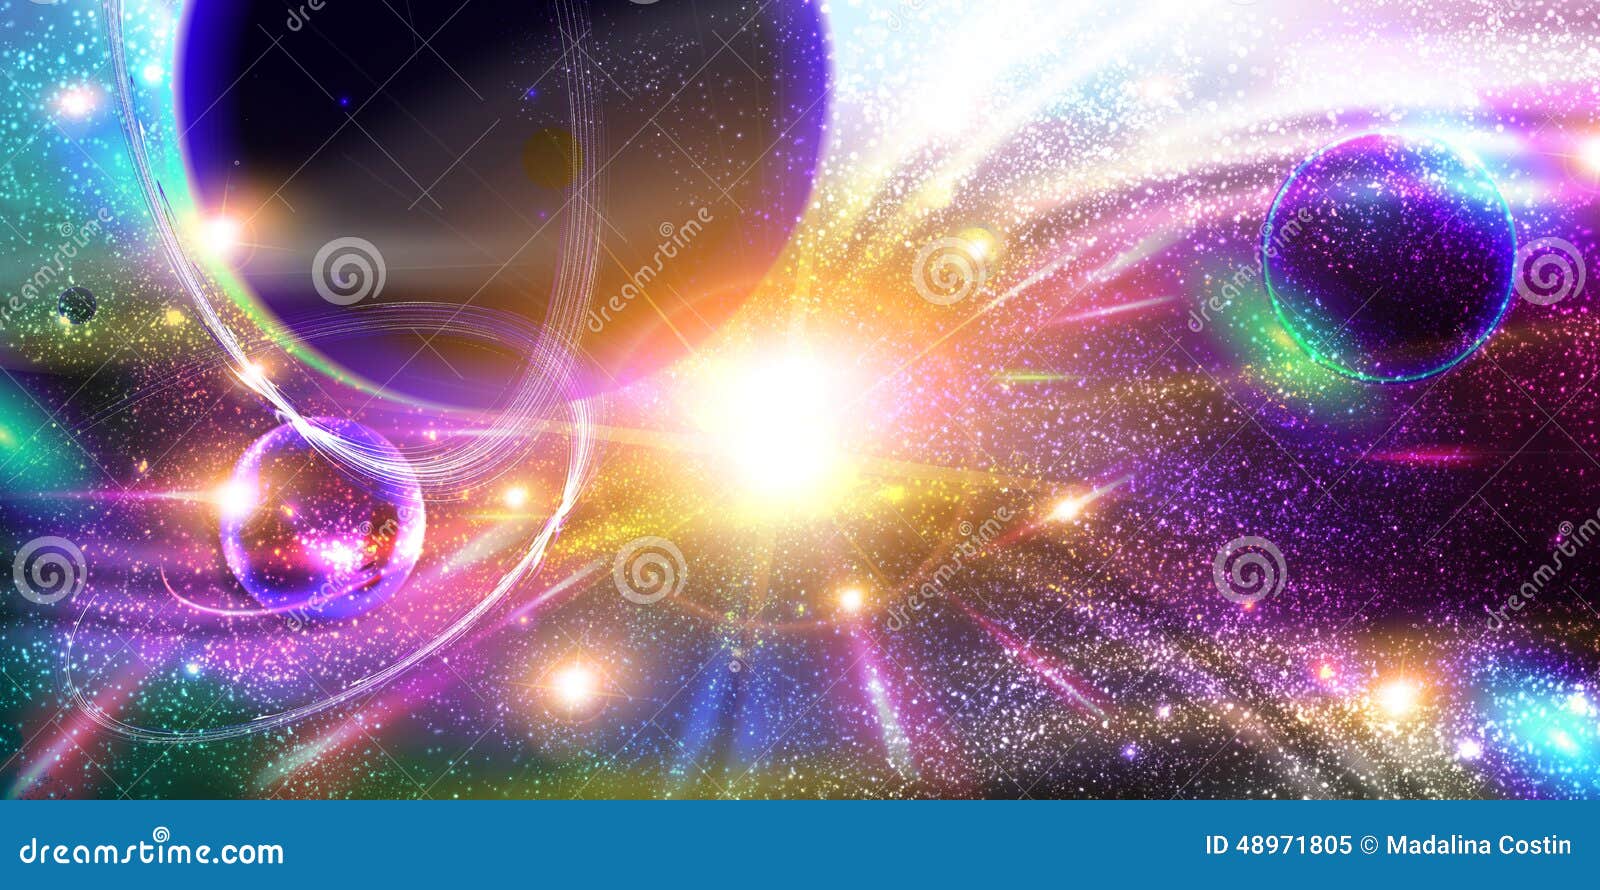 space background with planets, stardust and meteorites